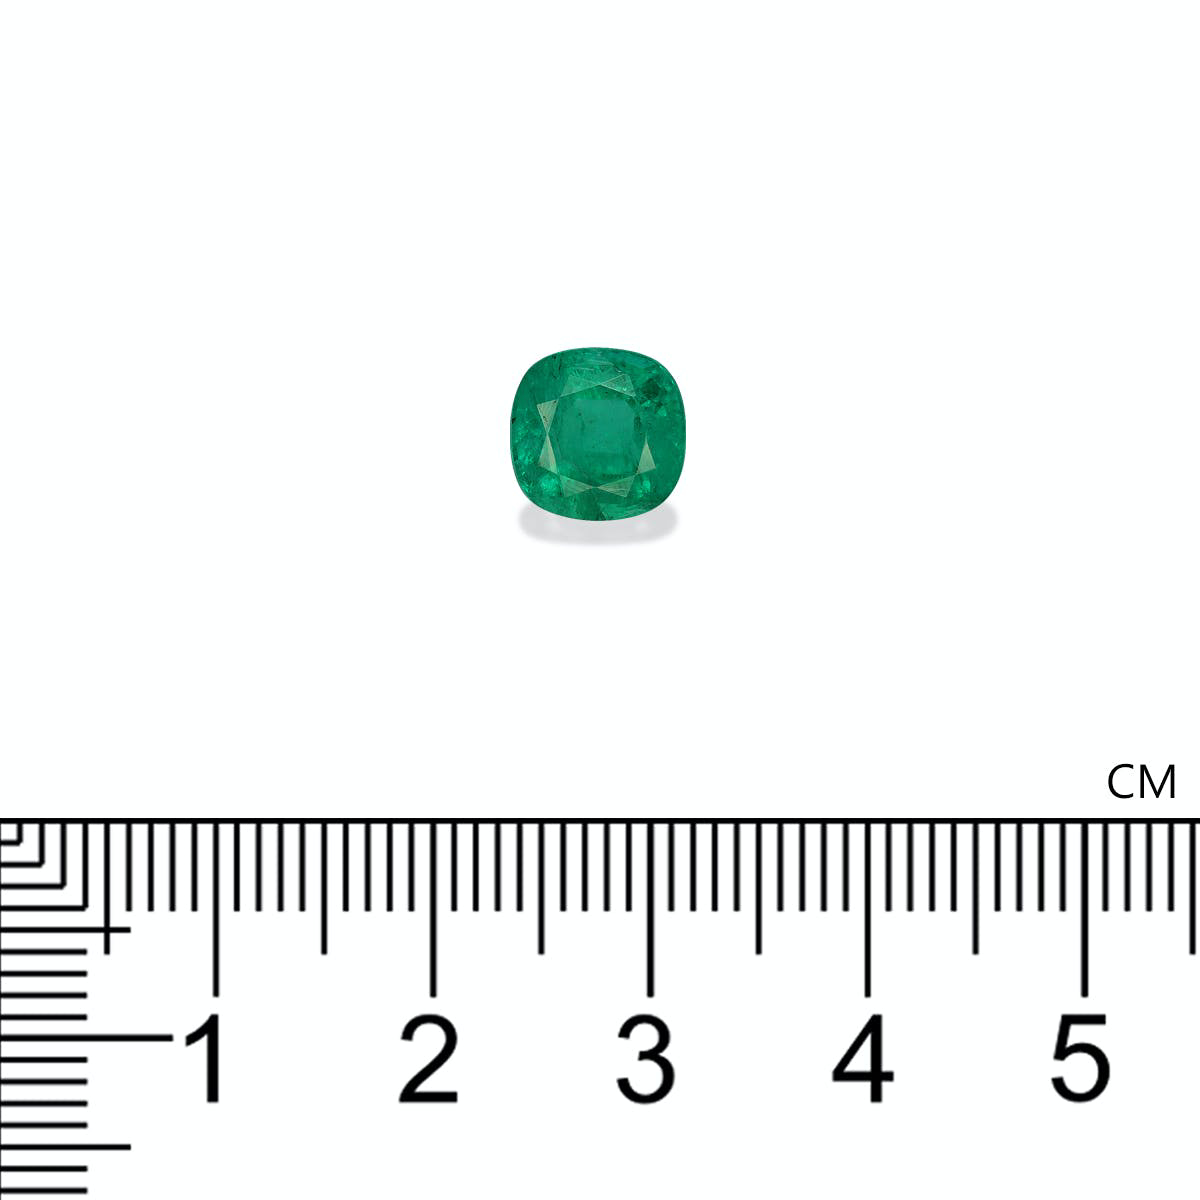 Green Colombian Emerald 2.24ct - 8mm (PG0423)